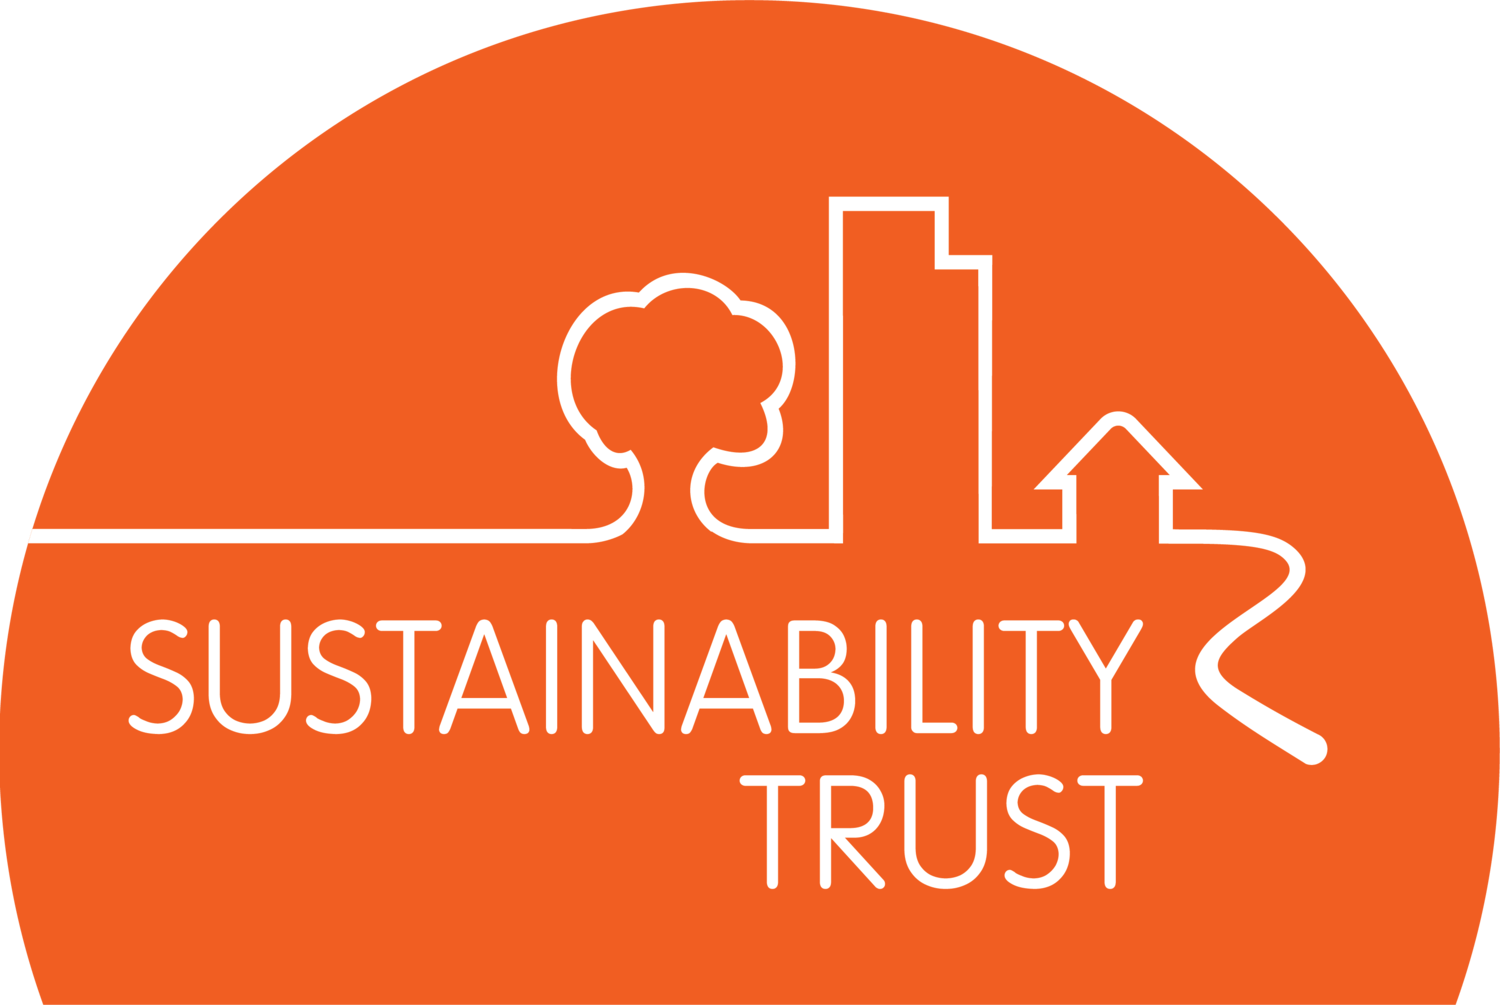 Sustainability Trust recommend All Accounted For for accounting and tax advice for Not For Profits and Charities